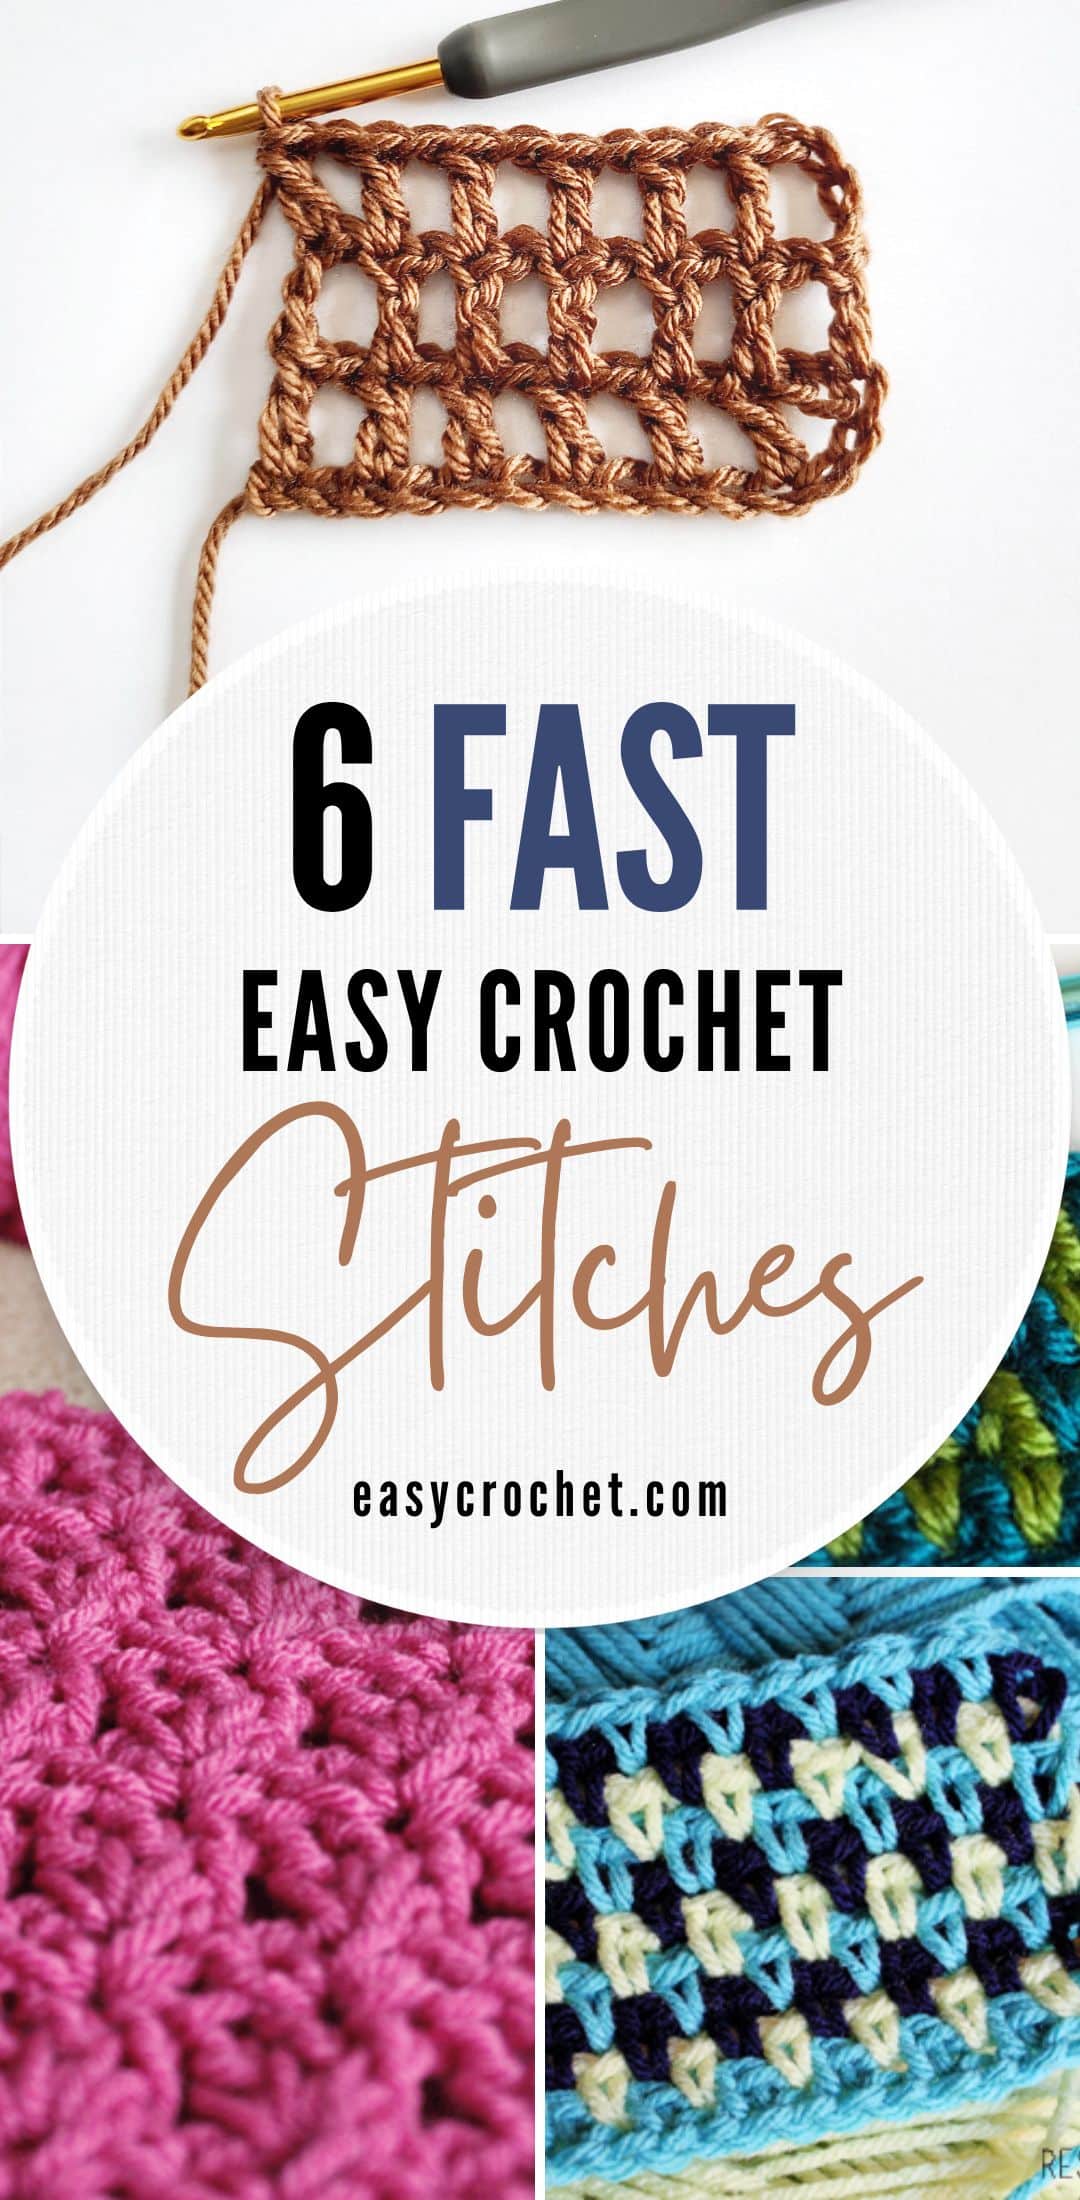 FAVORITE CROCHET TOOLS - These are Mine, What are Yours? 